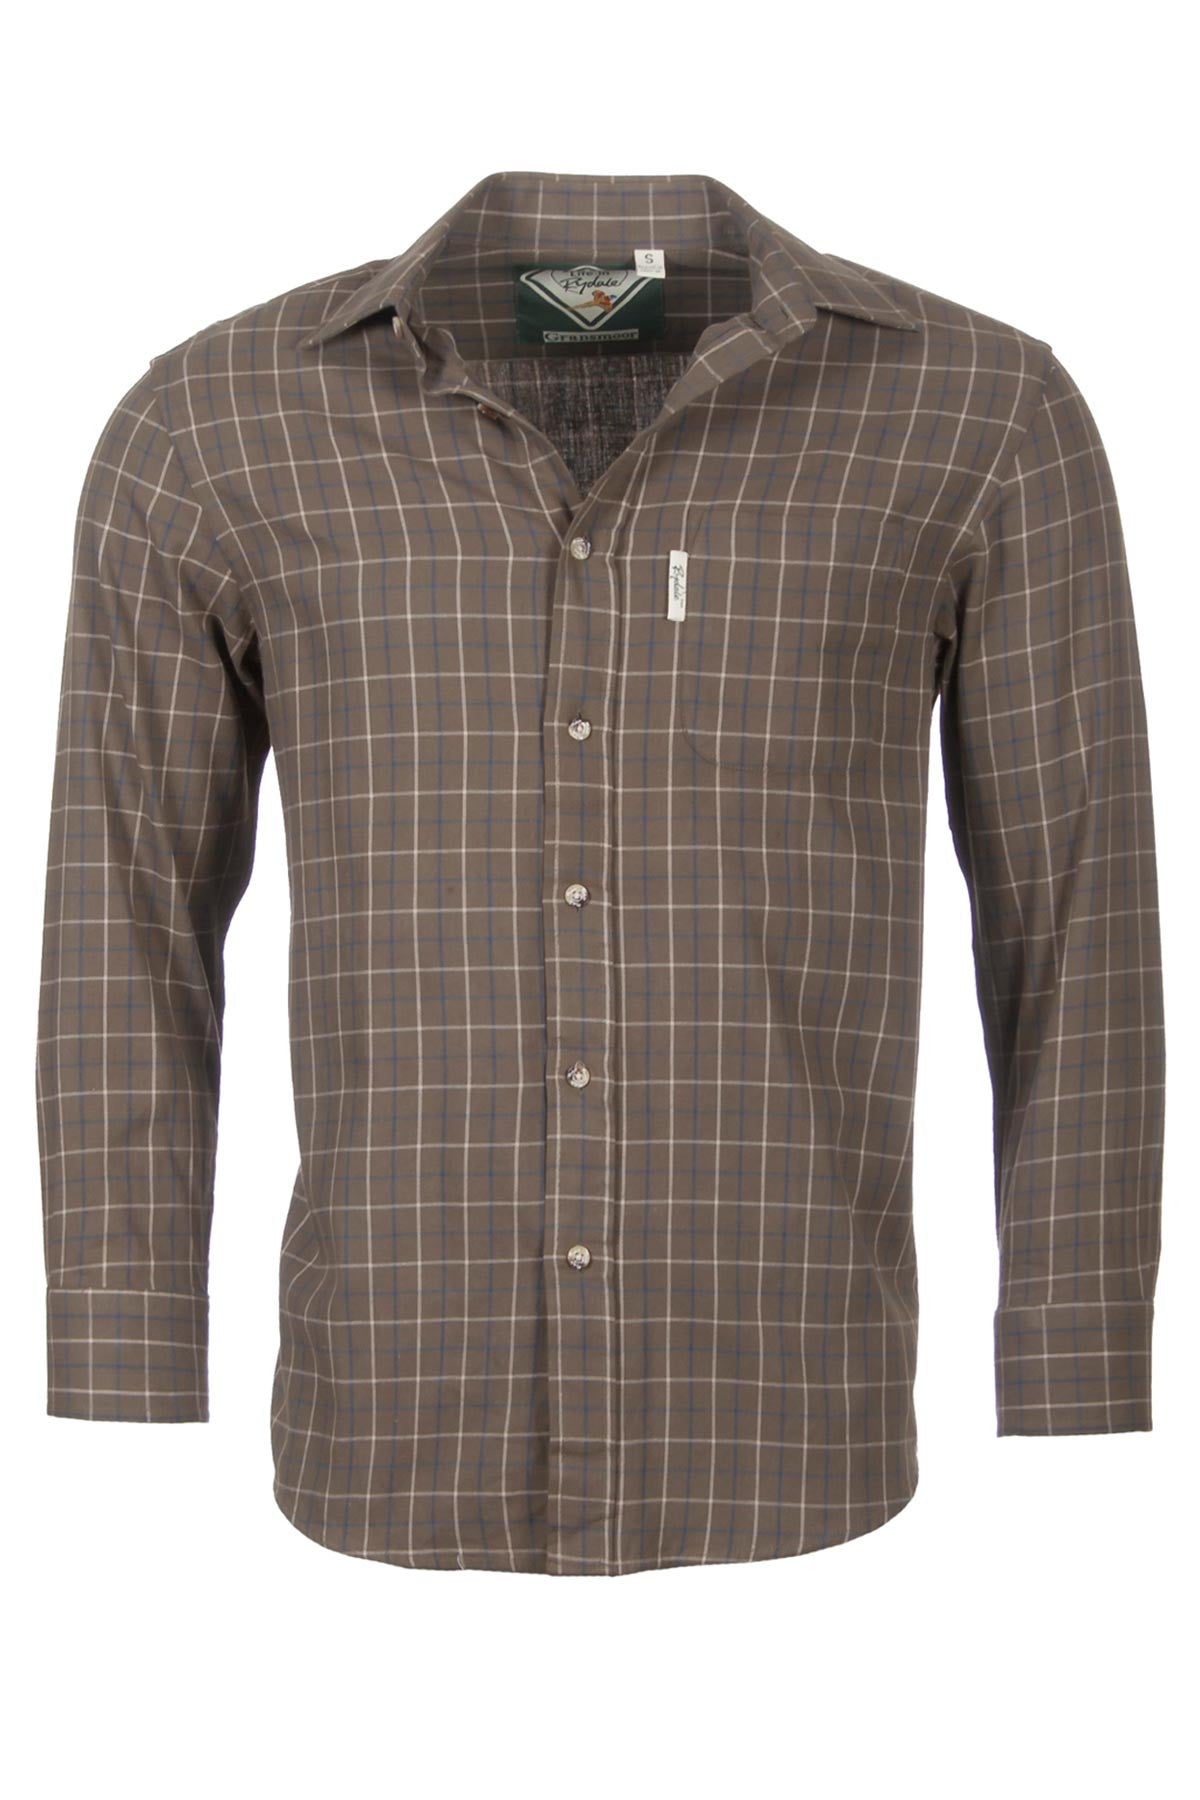 Mens Country Check Shirts UK | Rydale